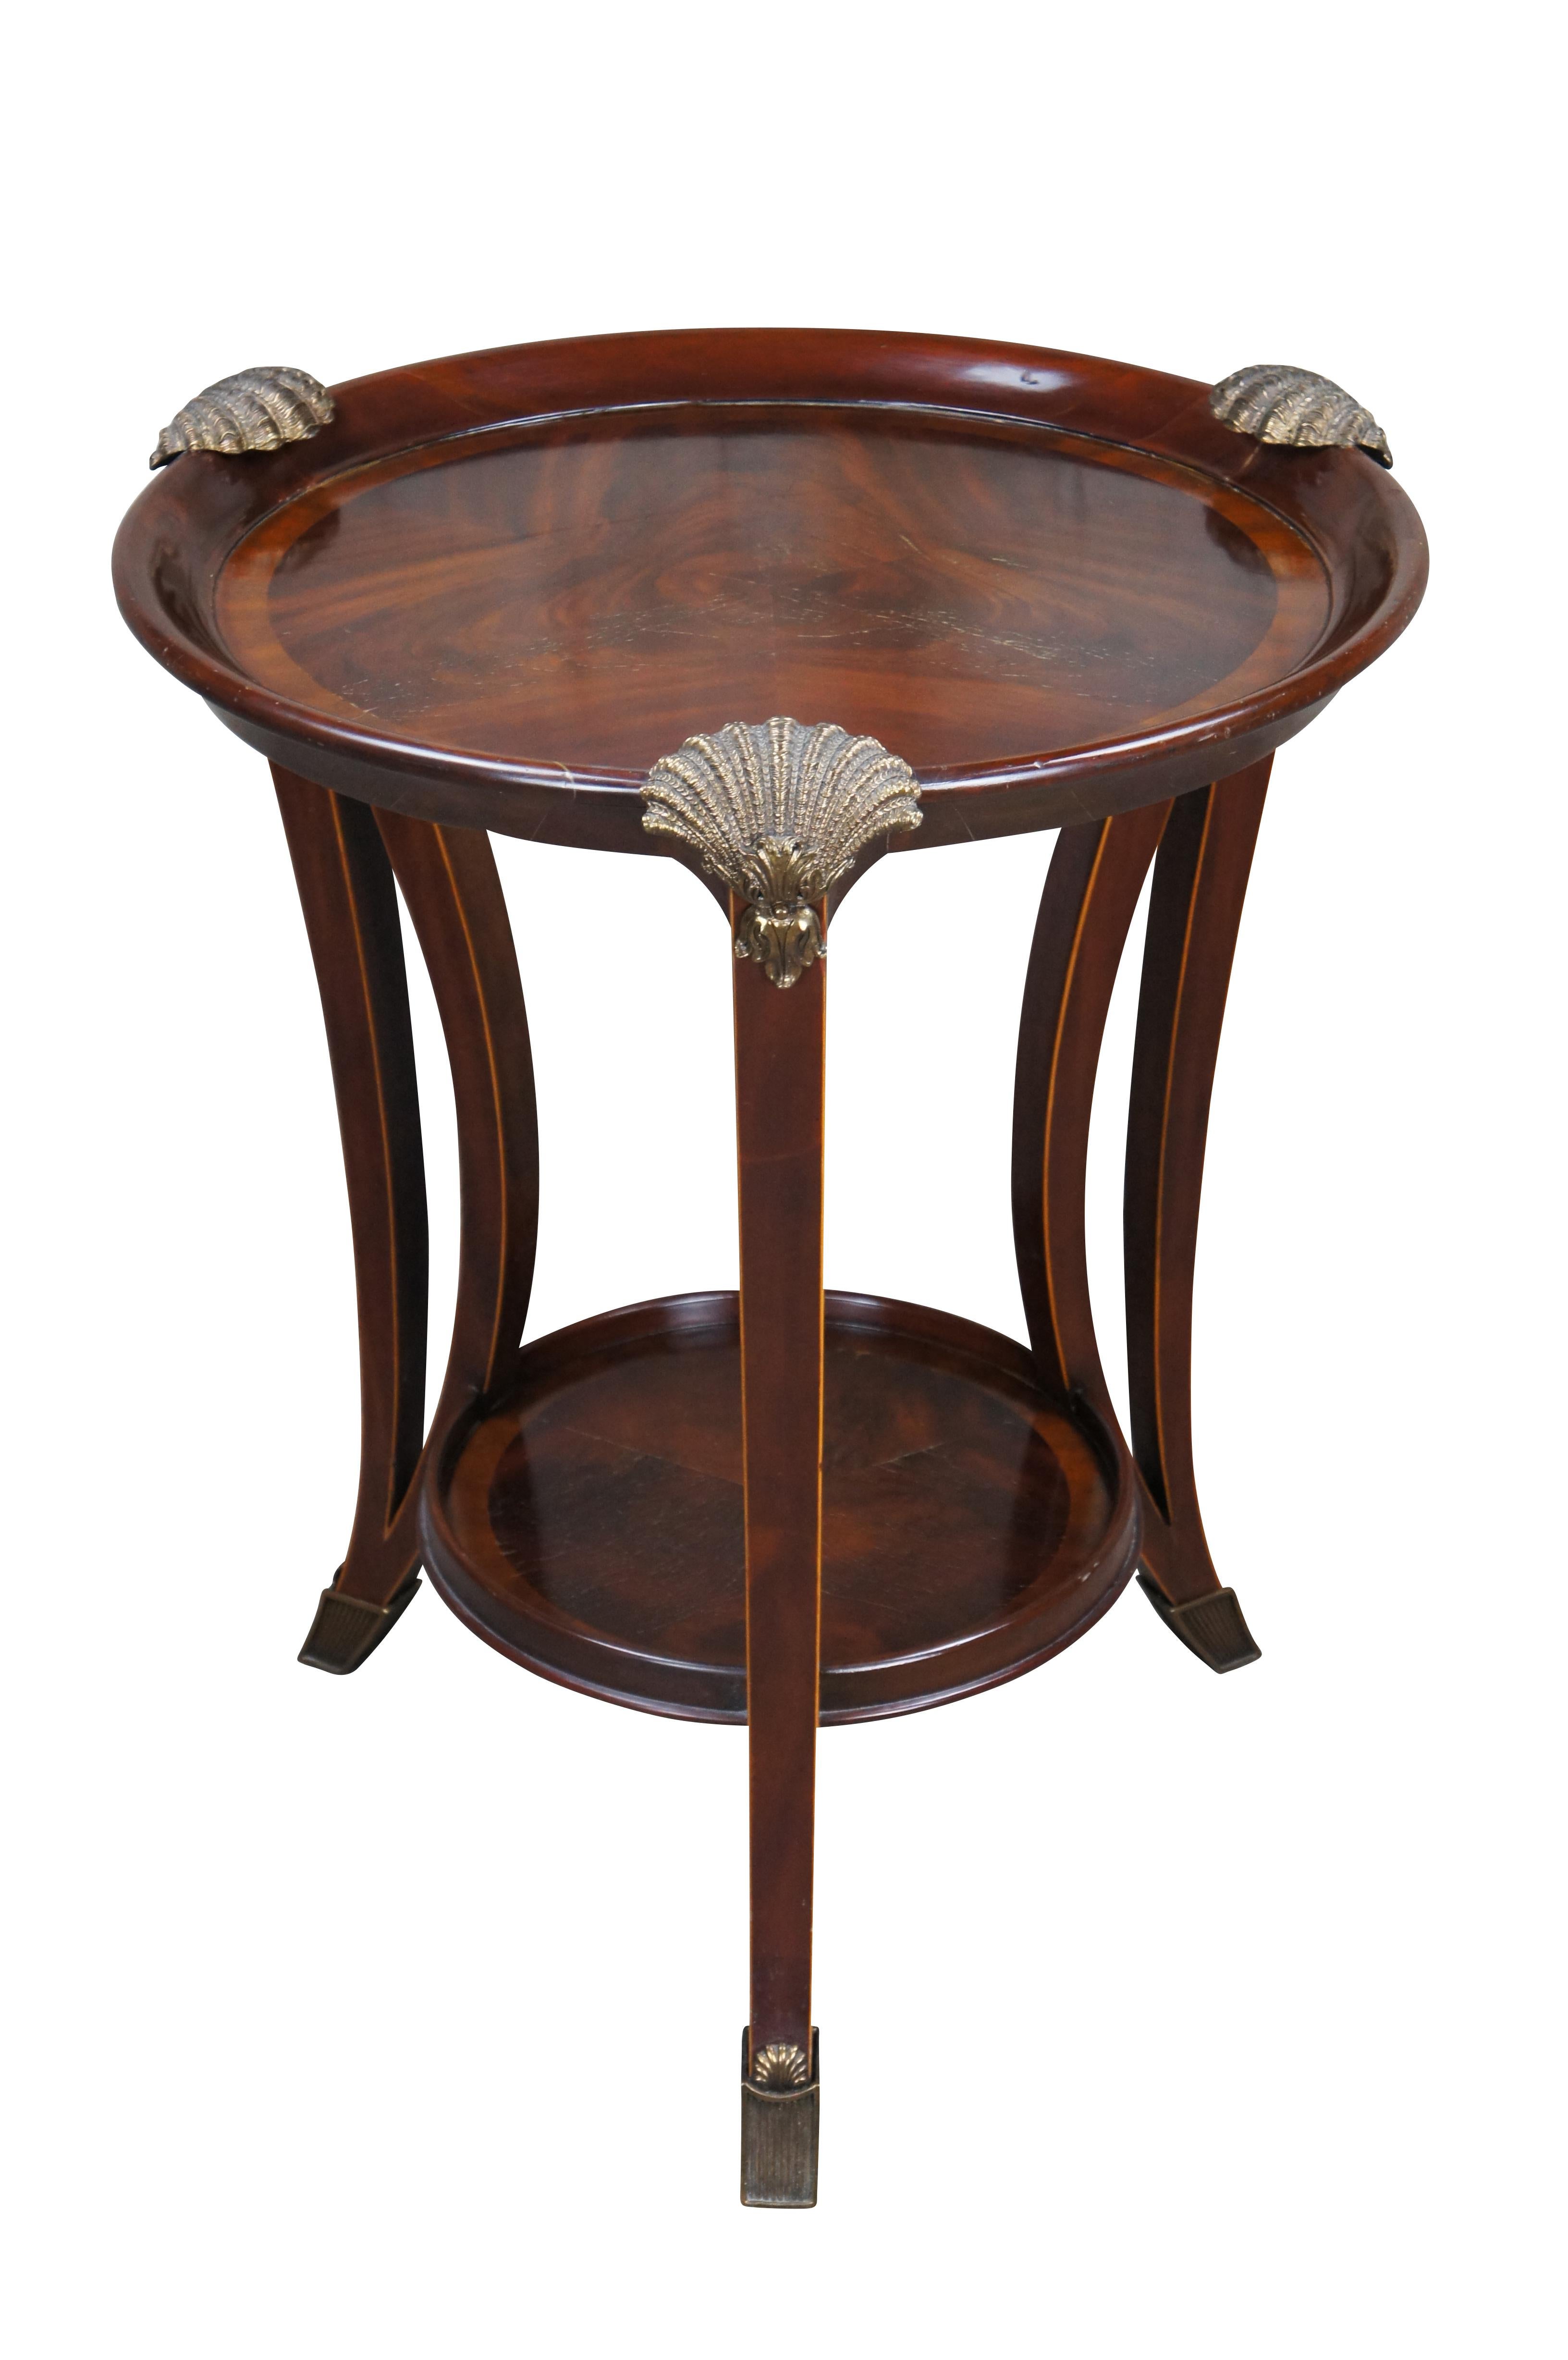 An impressive late 20th century two tier side table / sculpture stand by Maitland Smith. Features a round form inset top over three downswept and pierced square form legs leading to brass capped feet. The top showcases scalloped bronze ormolu mounts